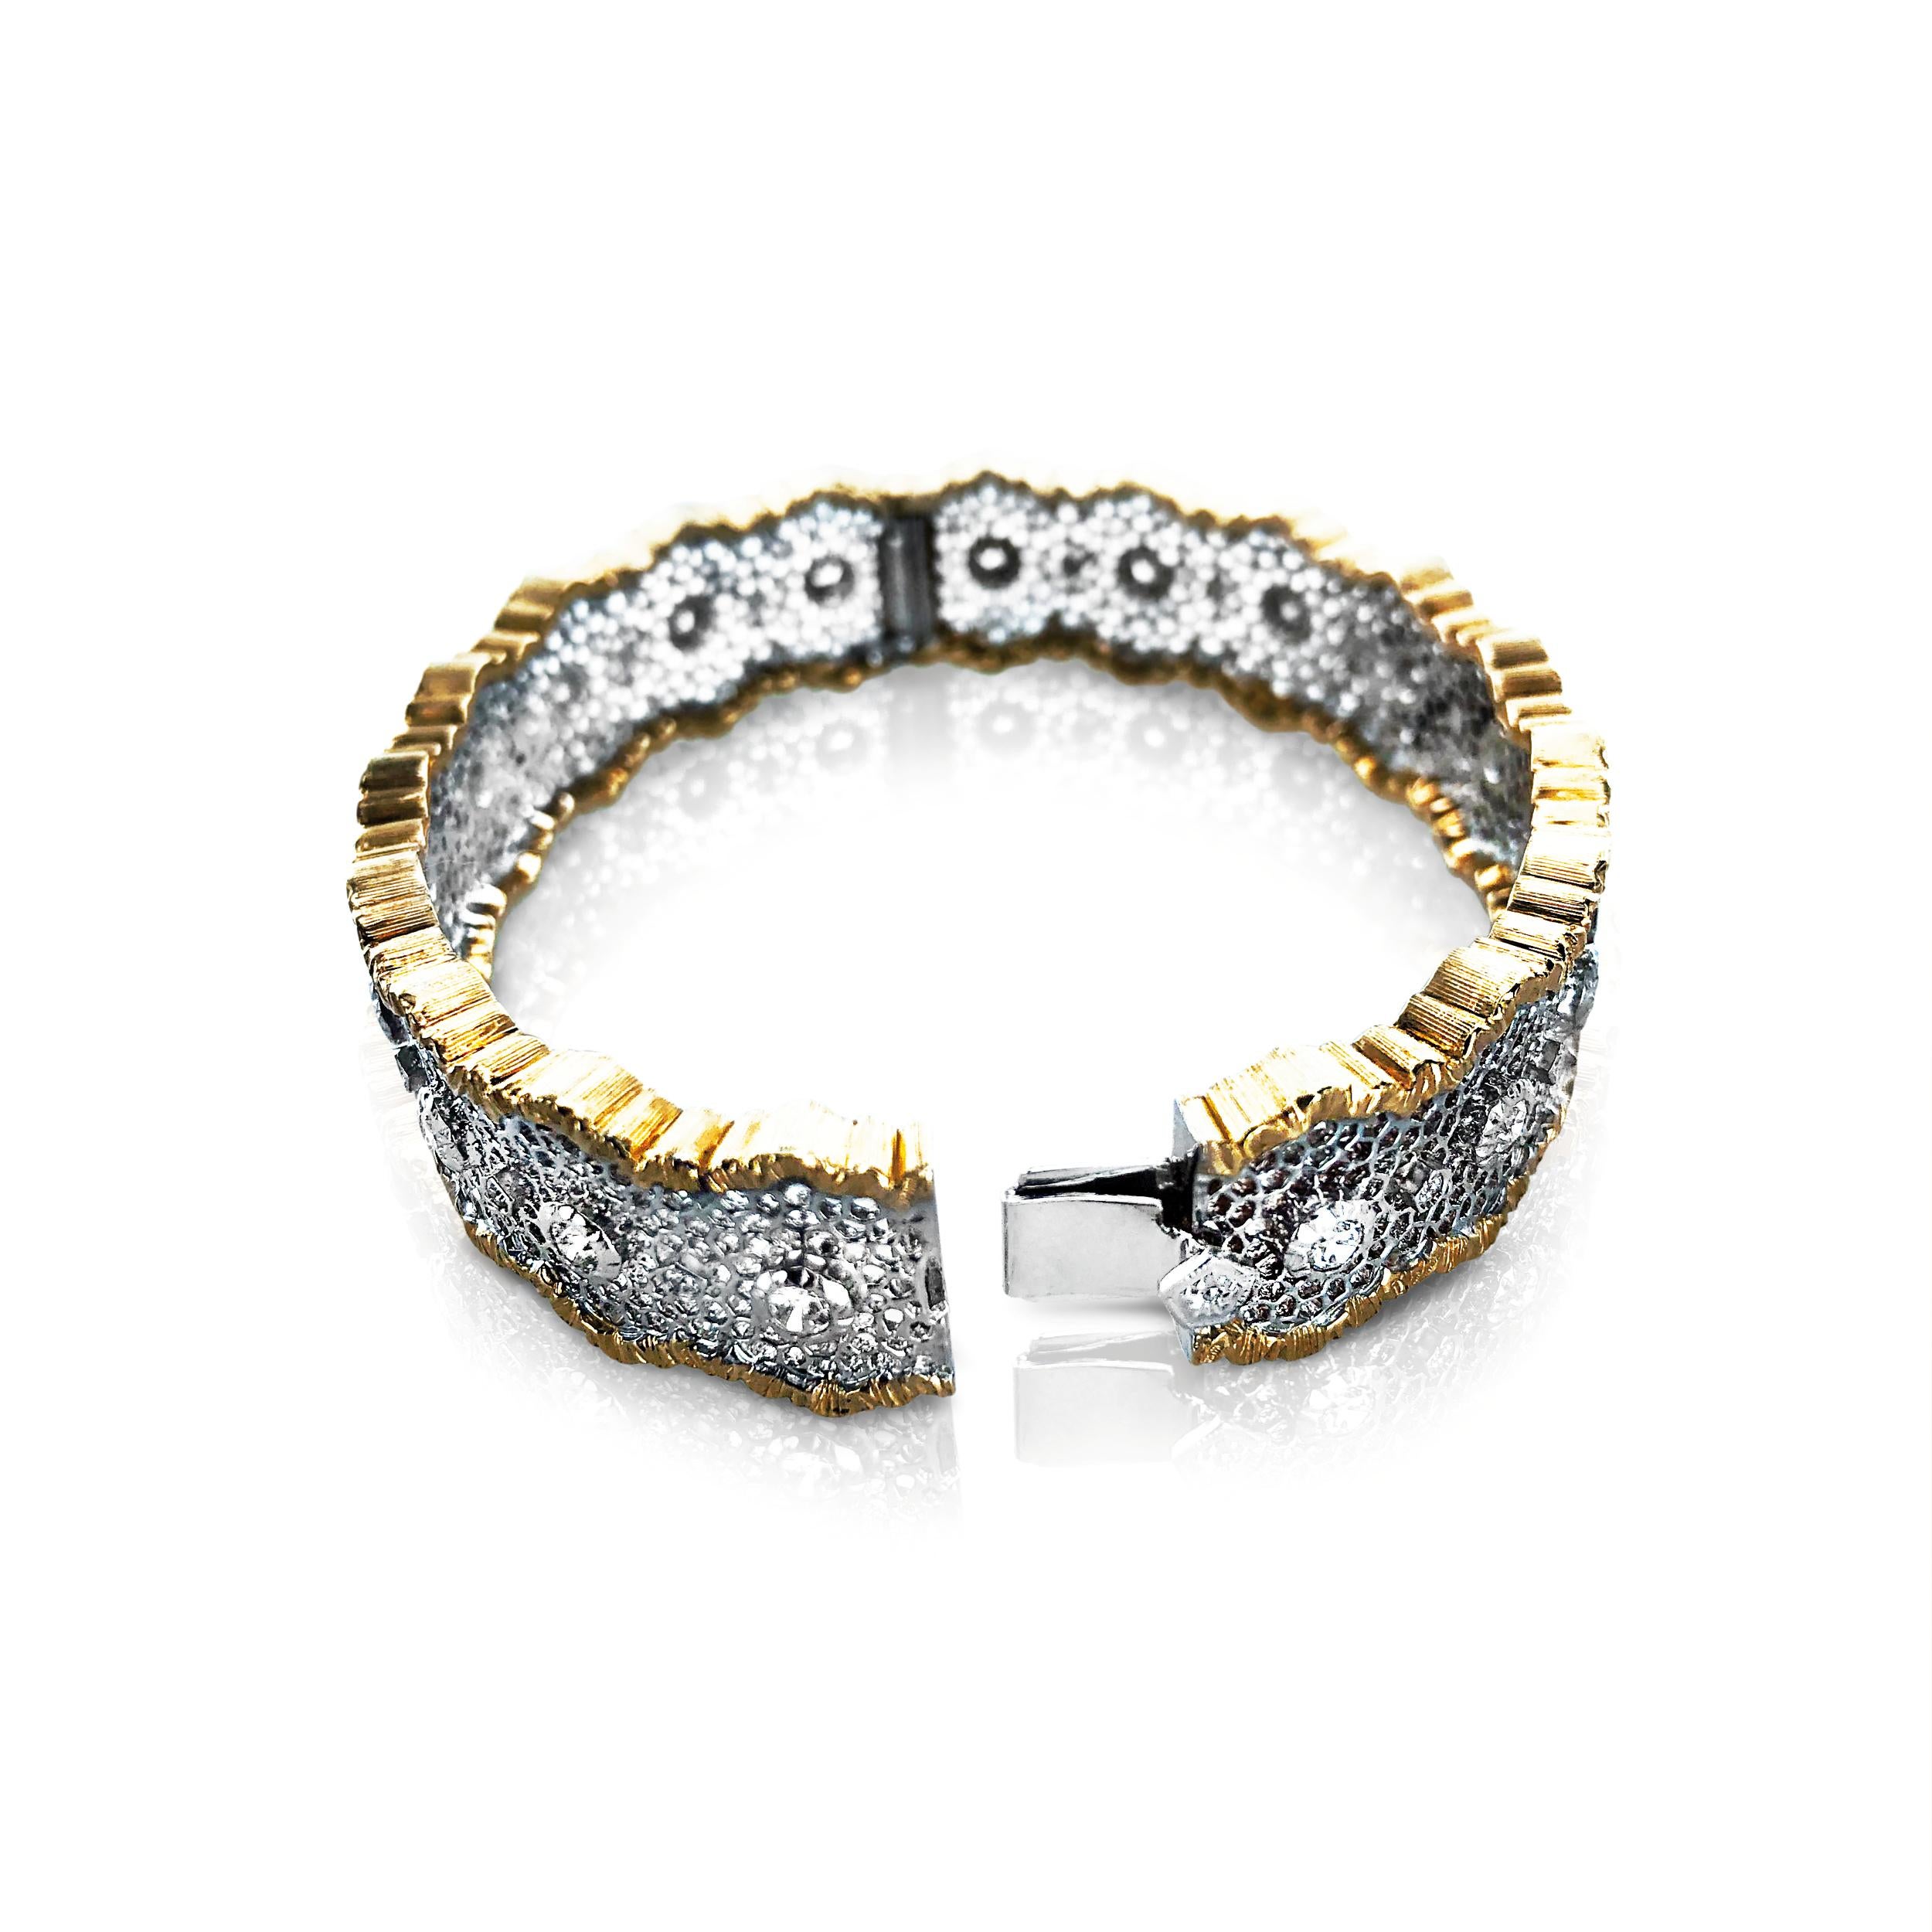 This 1.48 carats of diamonds Cecilia bangle is set in 18kt white and yellow Gold. 
It was designed and inspired by Leonardo da Vinci's architectural drawings and is sprinkled with the internationally patented Leonardo da Vinci Cut diamond. 

The